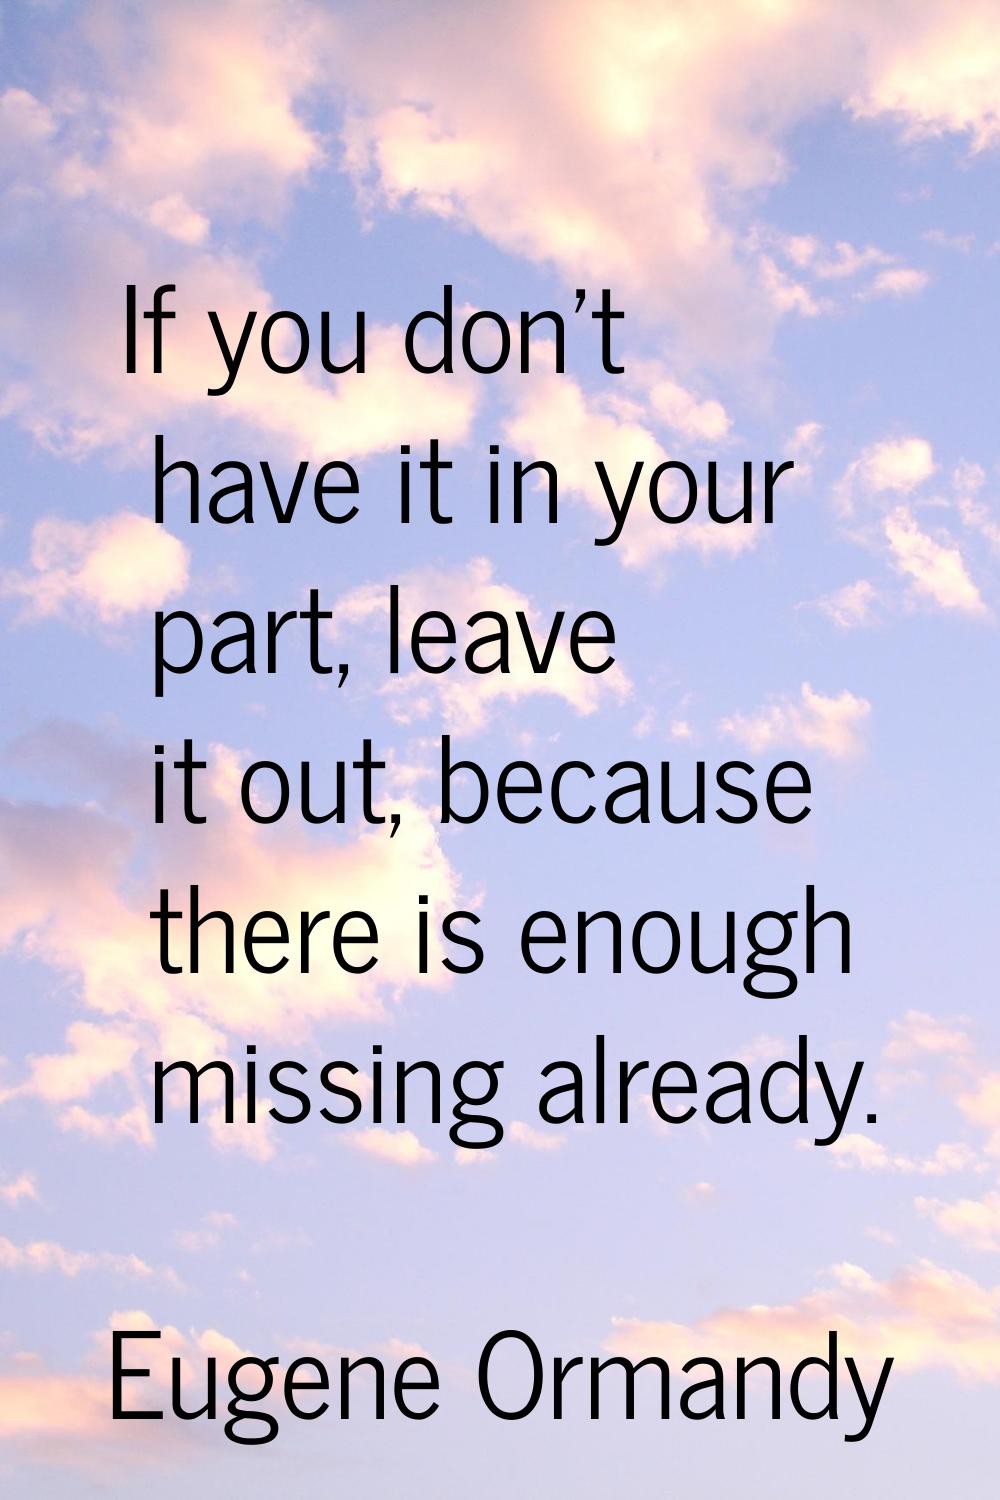 If you don't have it in your part, leave it out, because there is enough missing already.